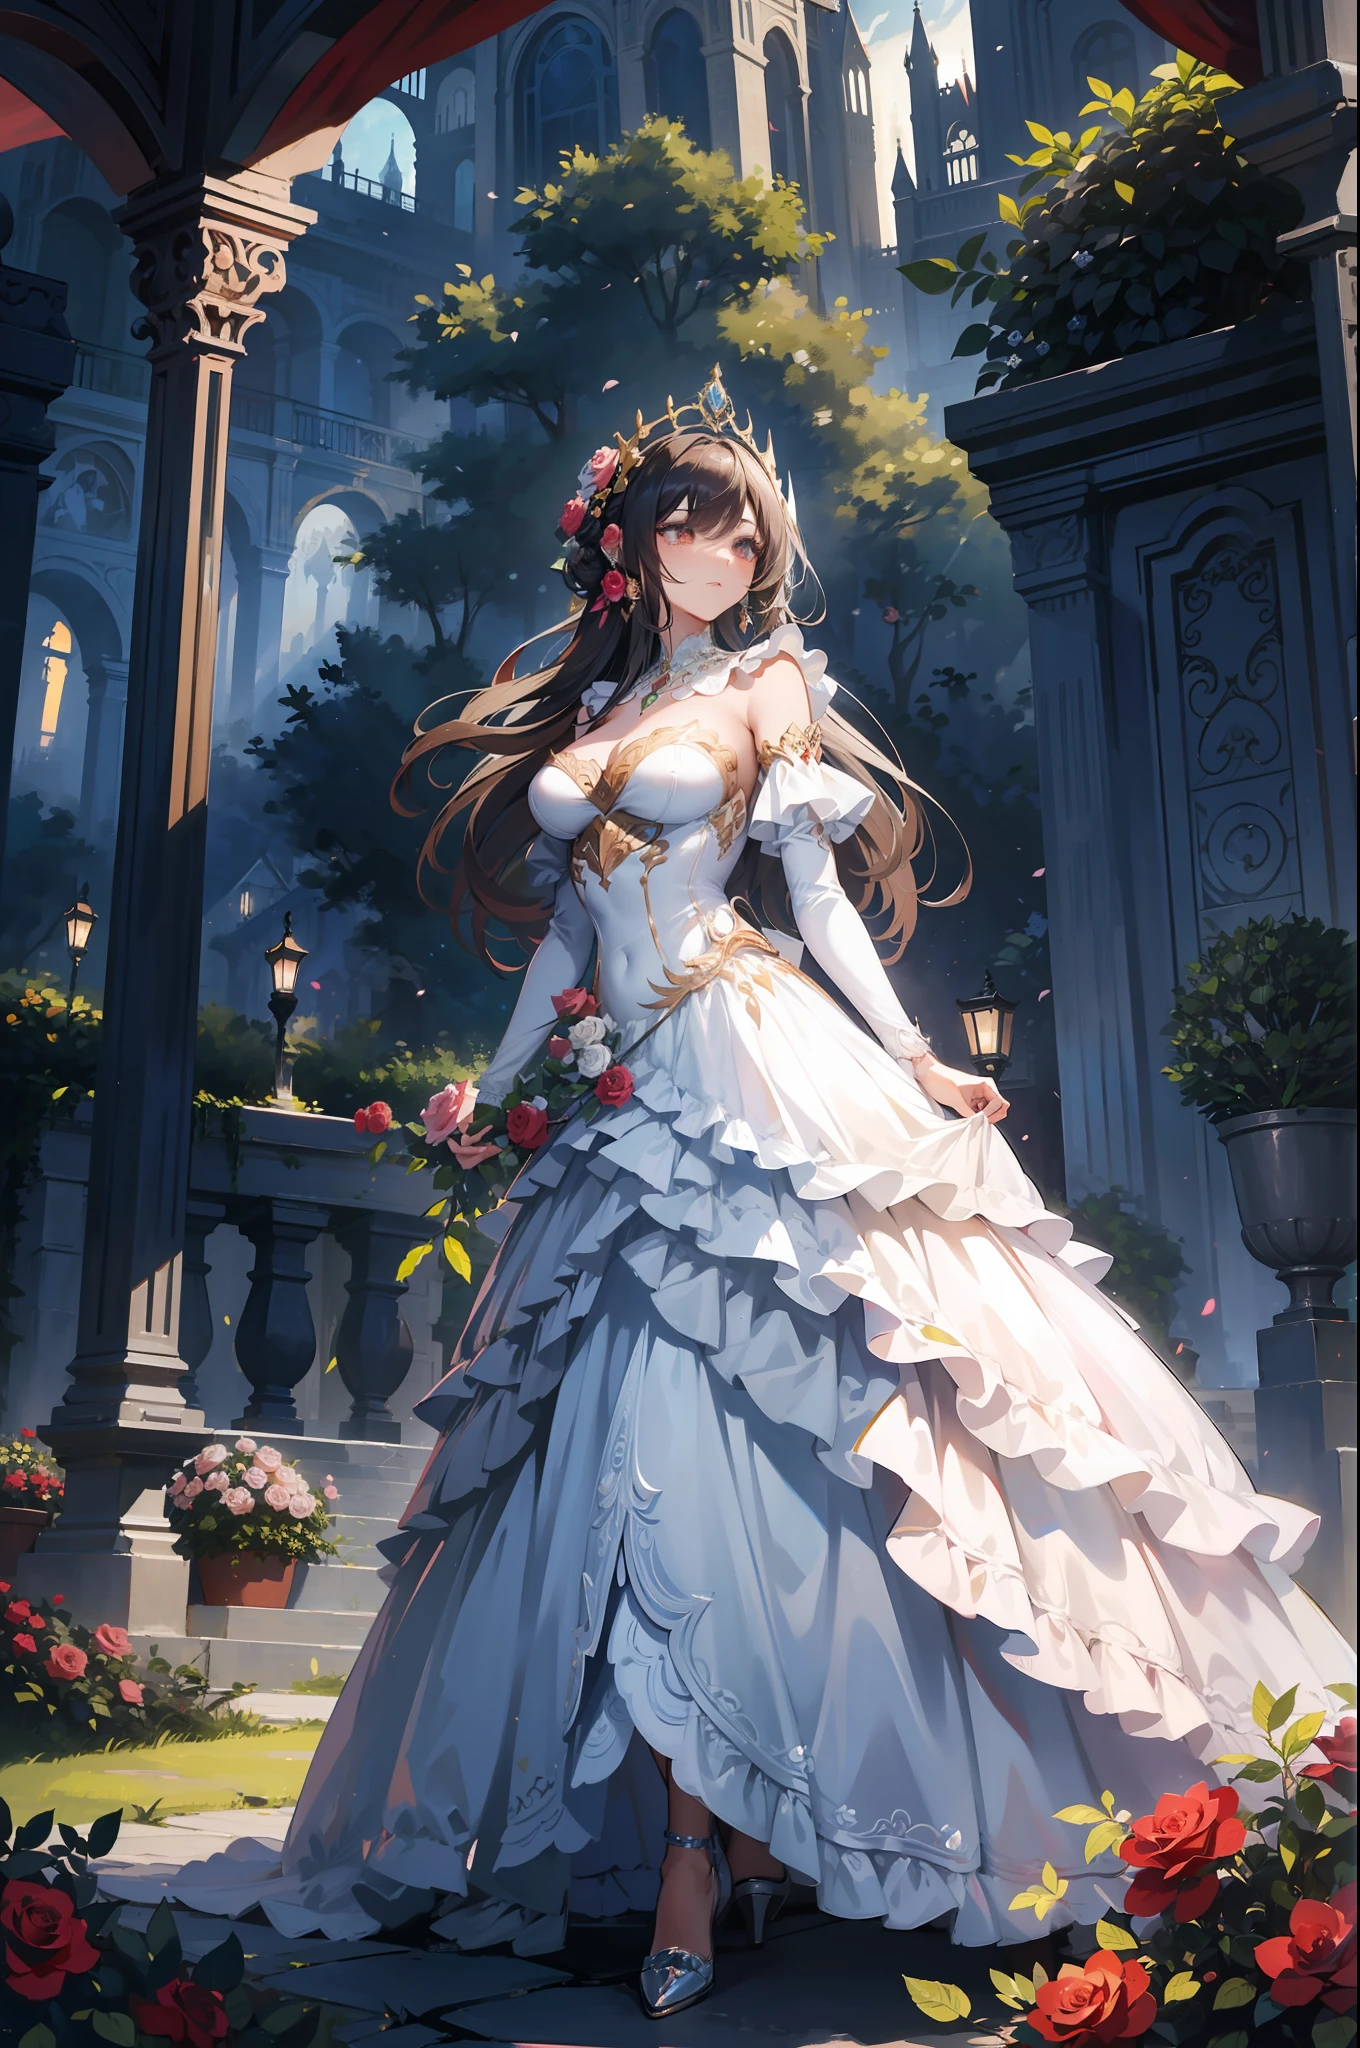 The most beautiful rose bush imaginable and an incredibly elegant young woman, superbly hairstyled, Spectacularly made up and wearing a dazzling dress in golden colors, fabulous black and gray. In a dream garden on a magical night. (Masterpiece) (Best Quality)